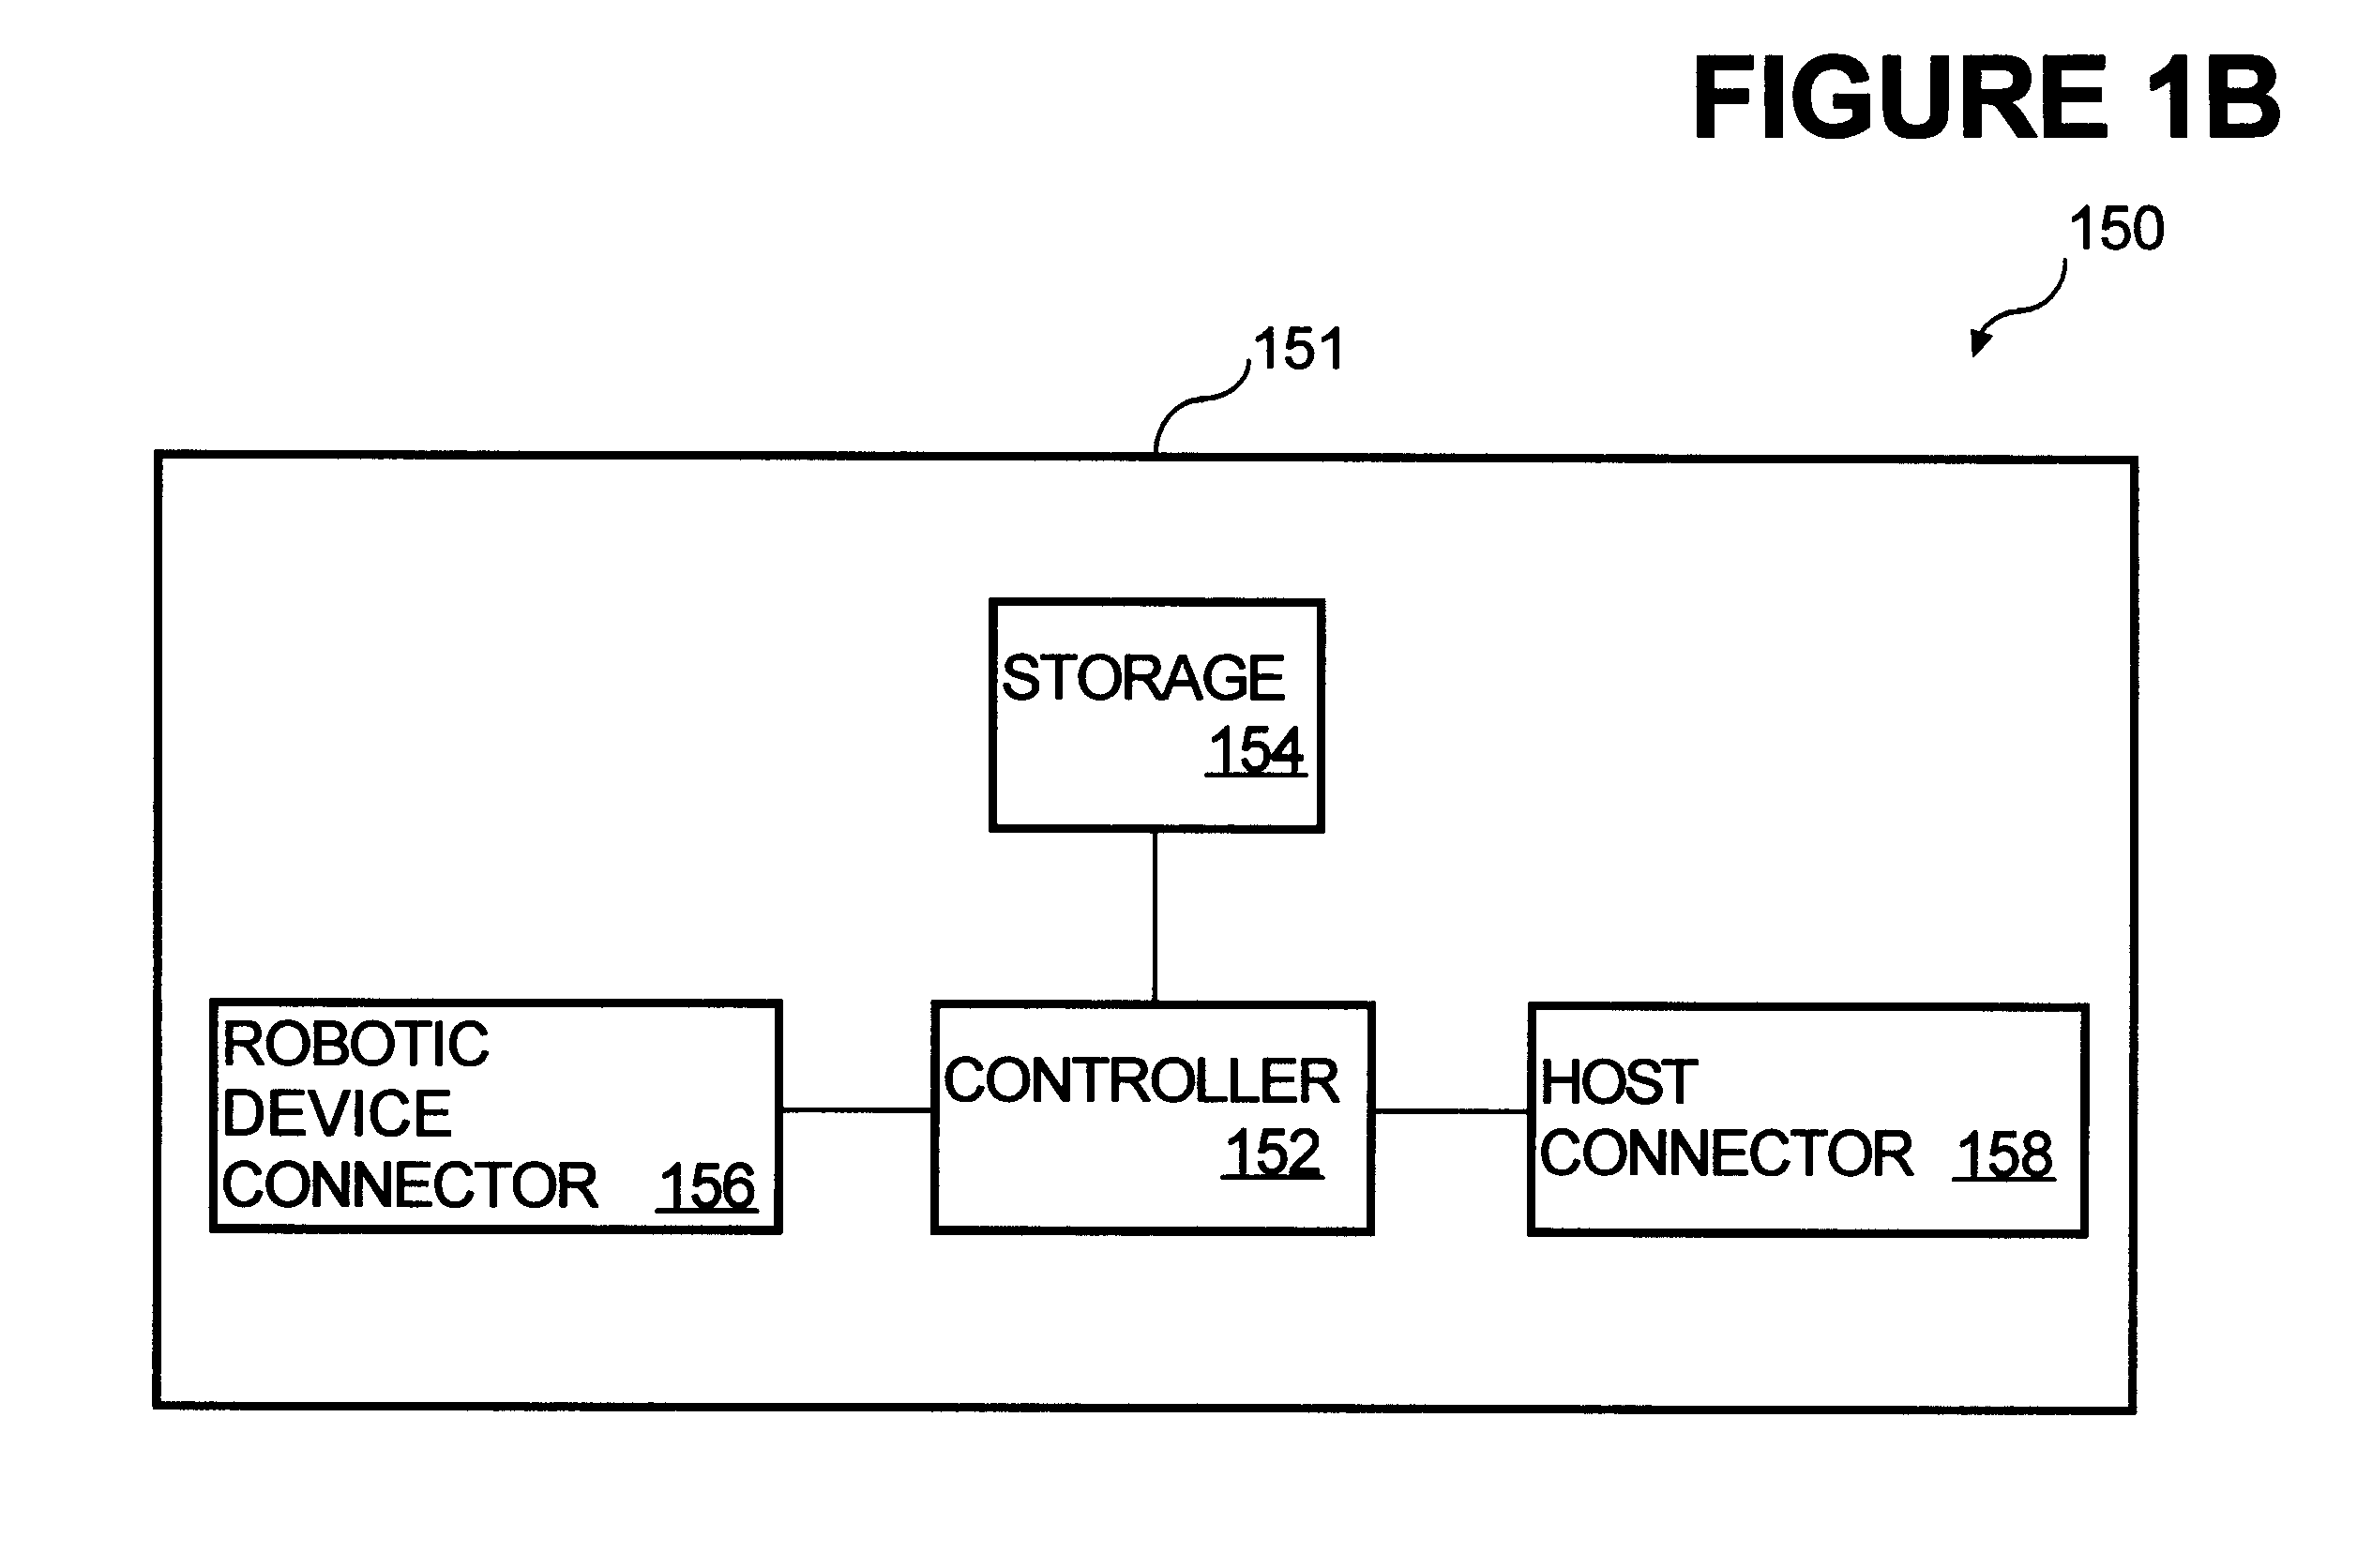 Automated data storage library with multipurpose slots providing user-selected control path to shared robotic device